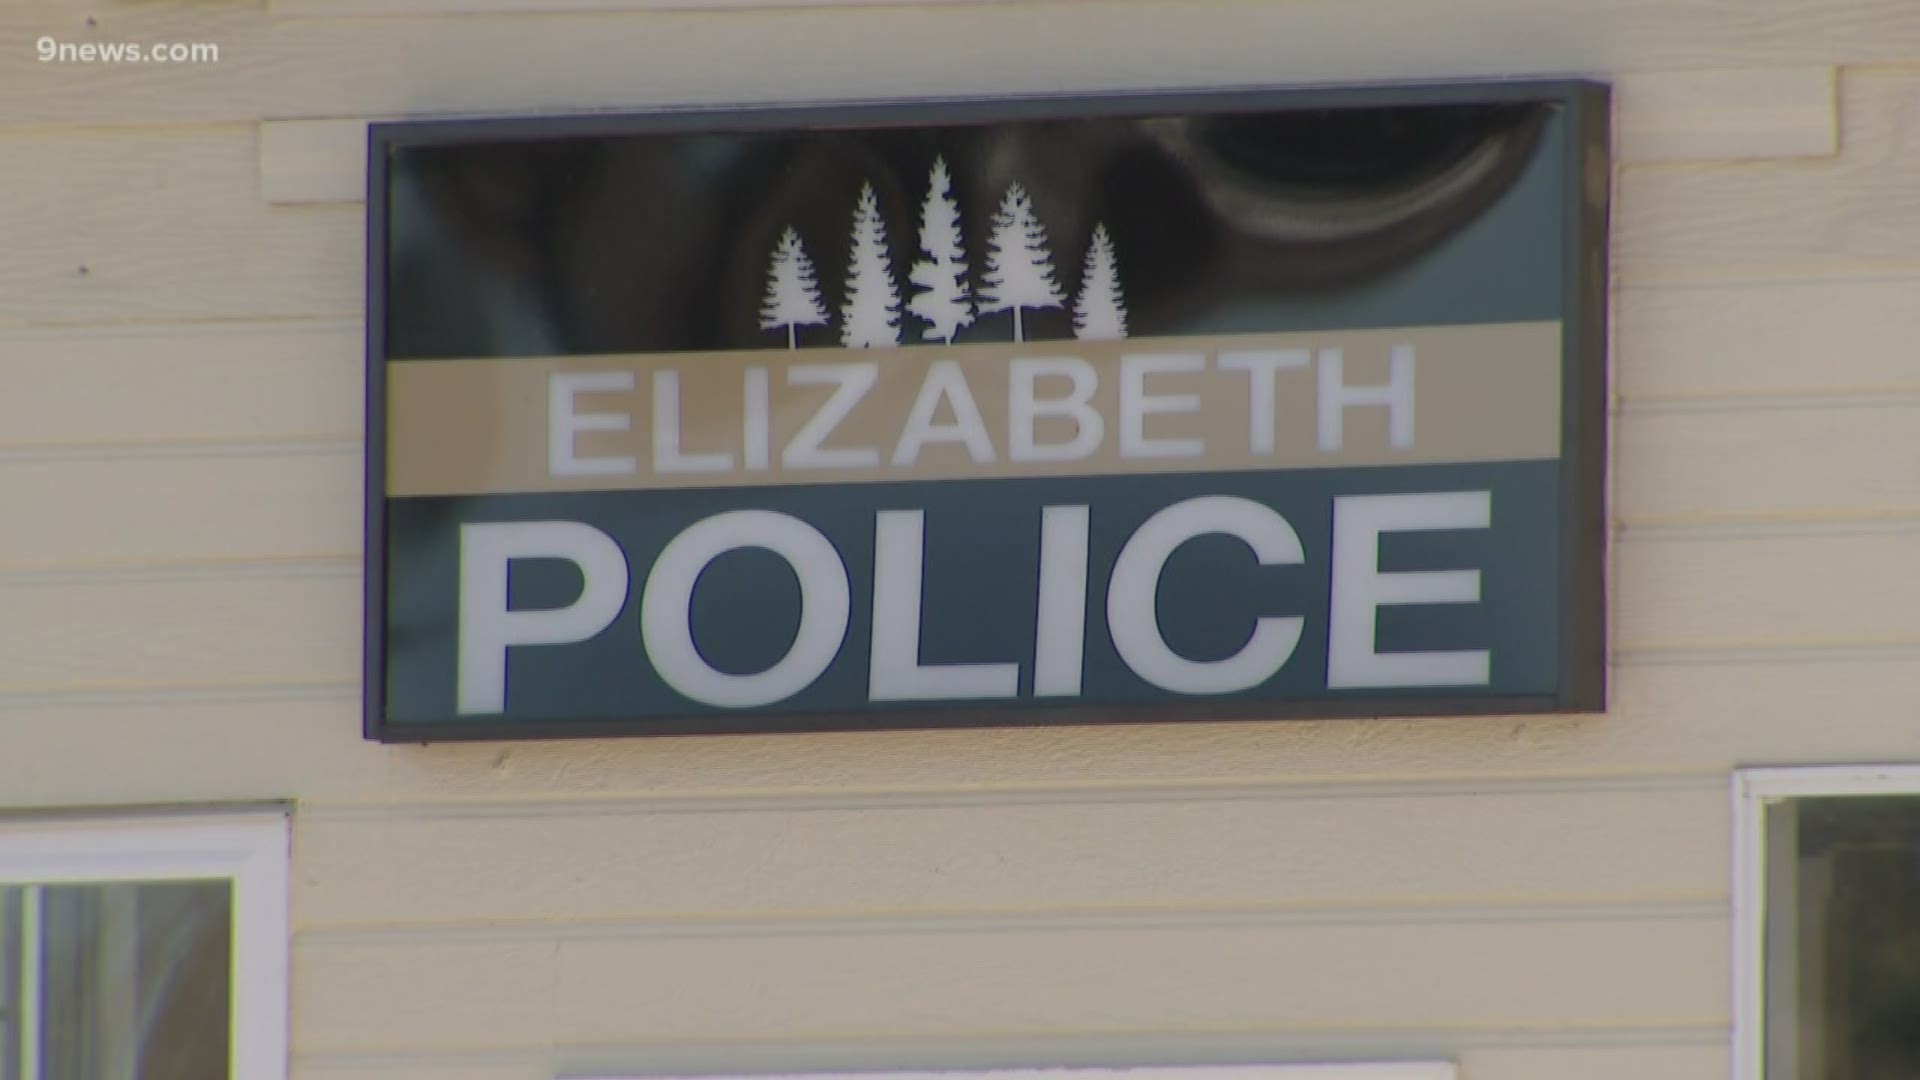 An expert said he was surprised the Department of Homeland Security contacted Elizabeth Police when it detected a specific threat to a high school.